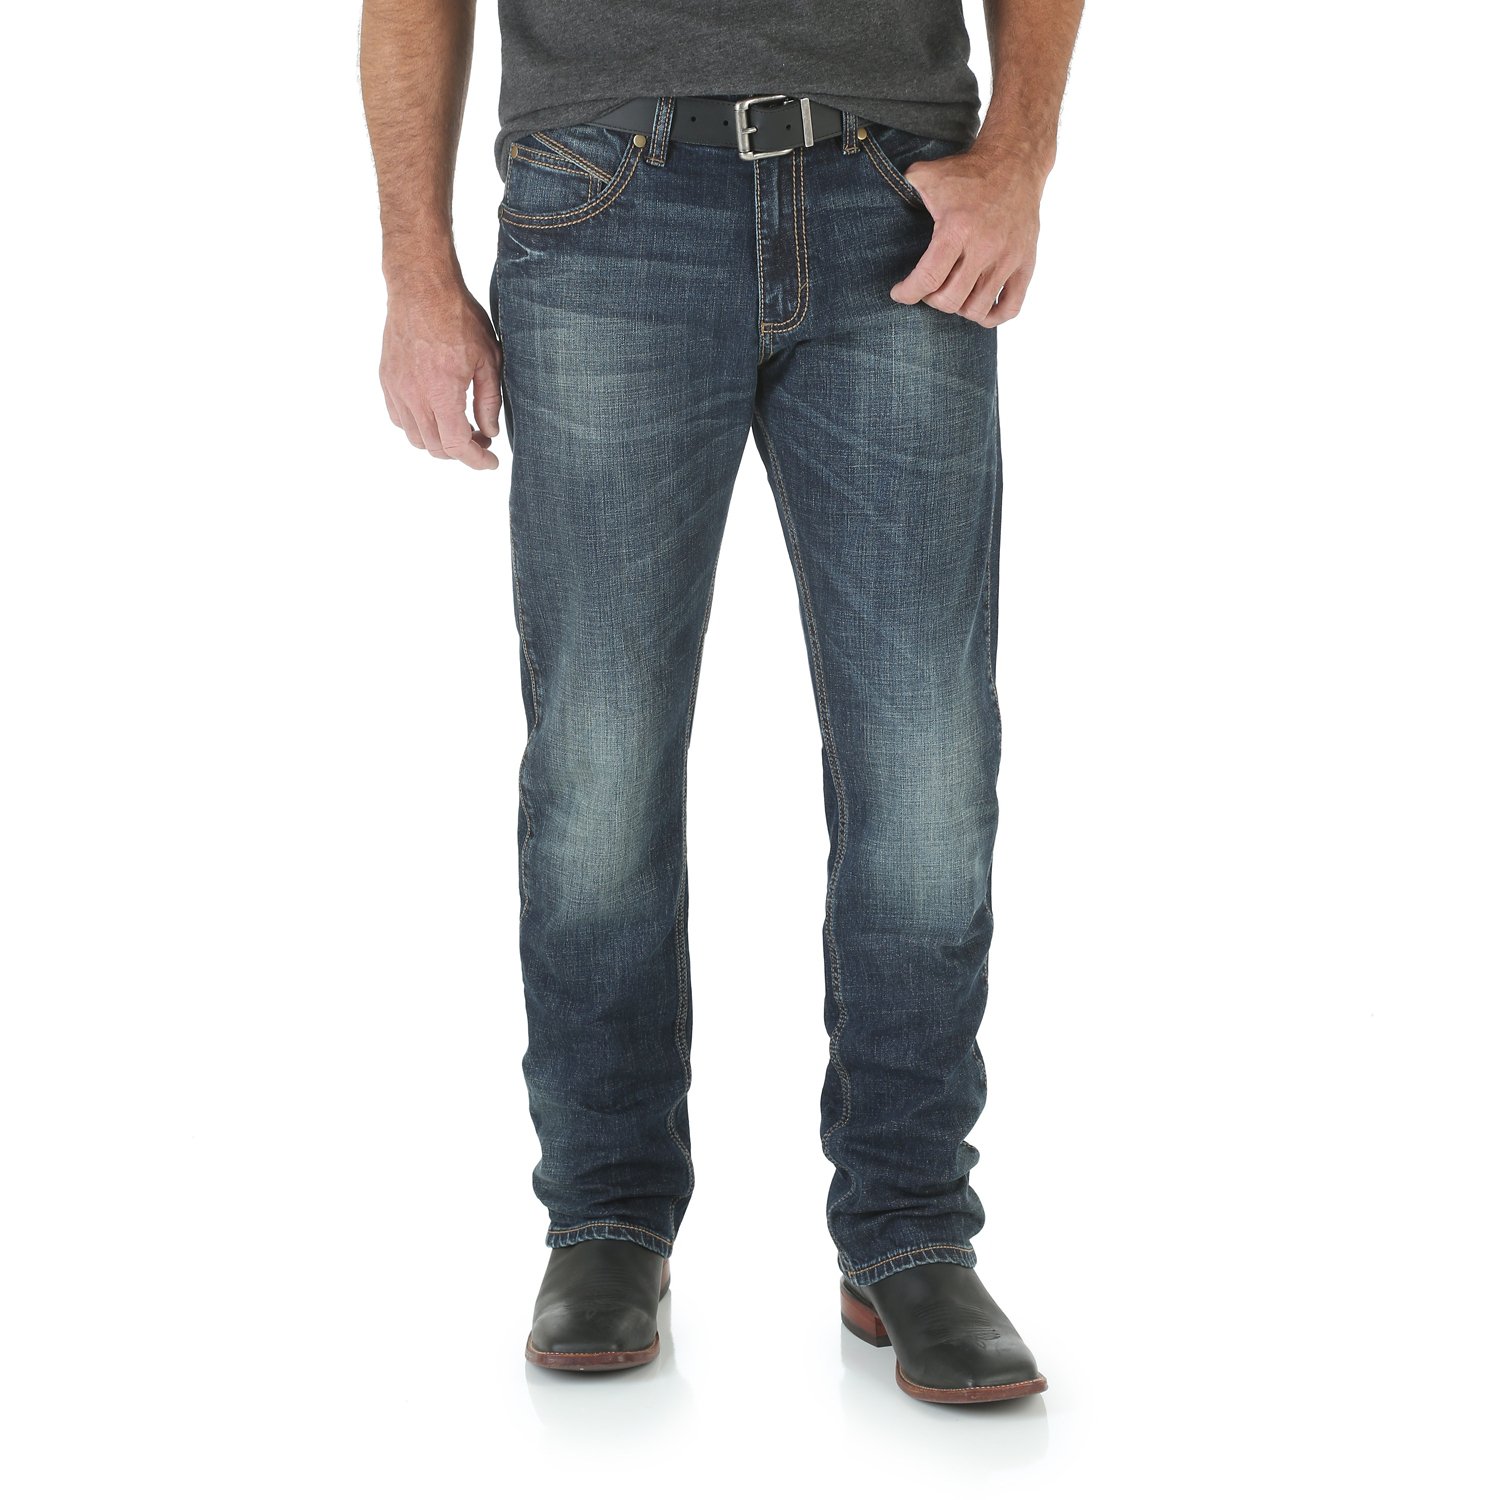 Wrangler Retro Slim Fit Straight Leg Jeans at Tractor Supply Co.